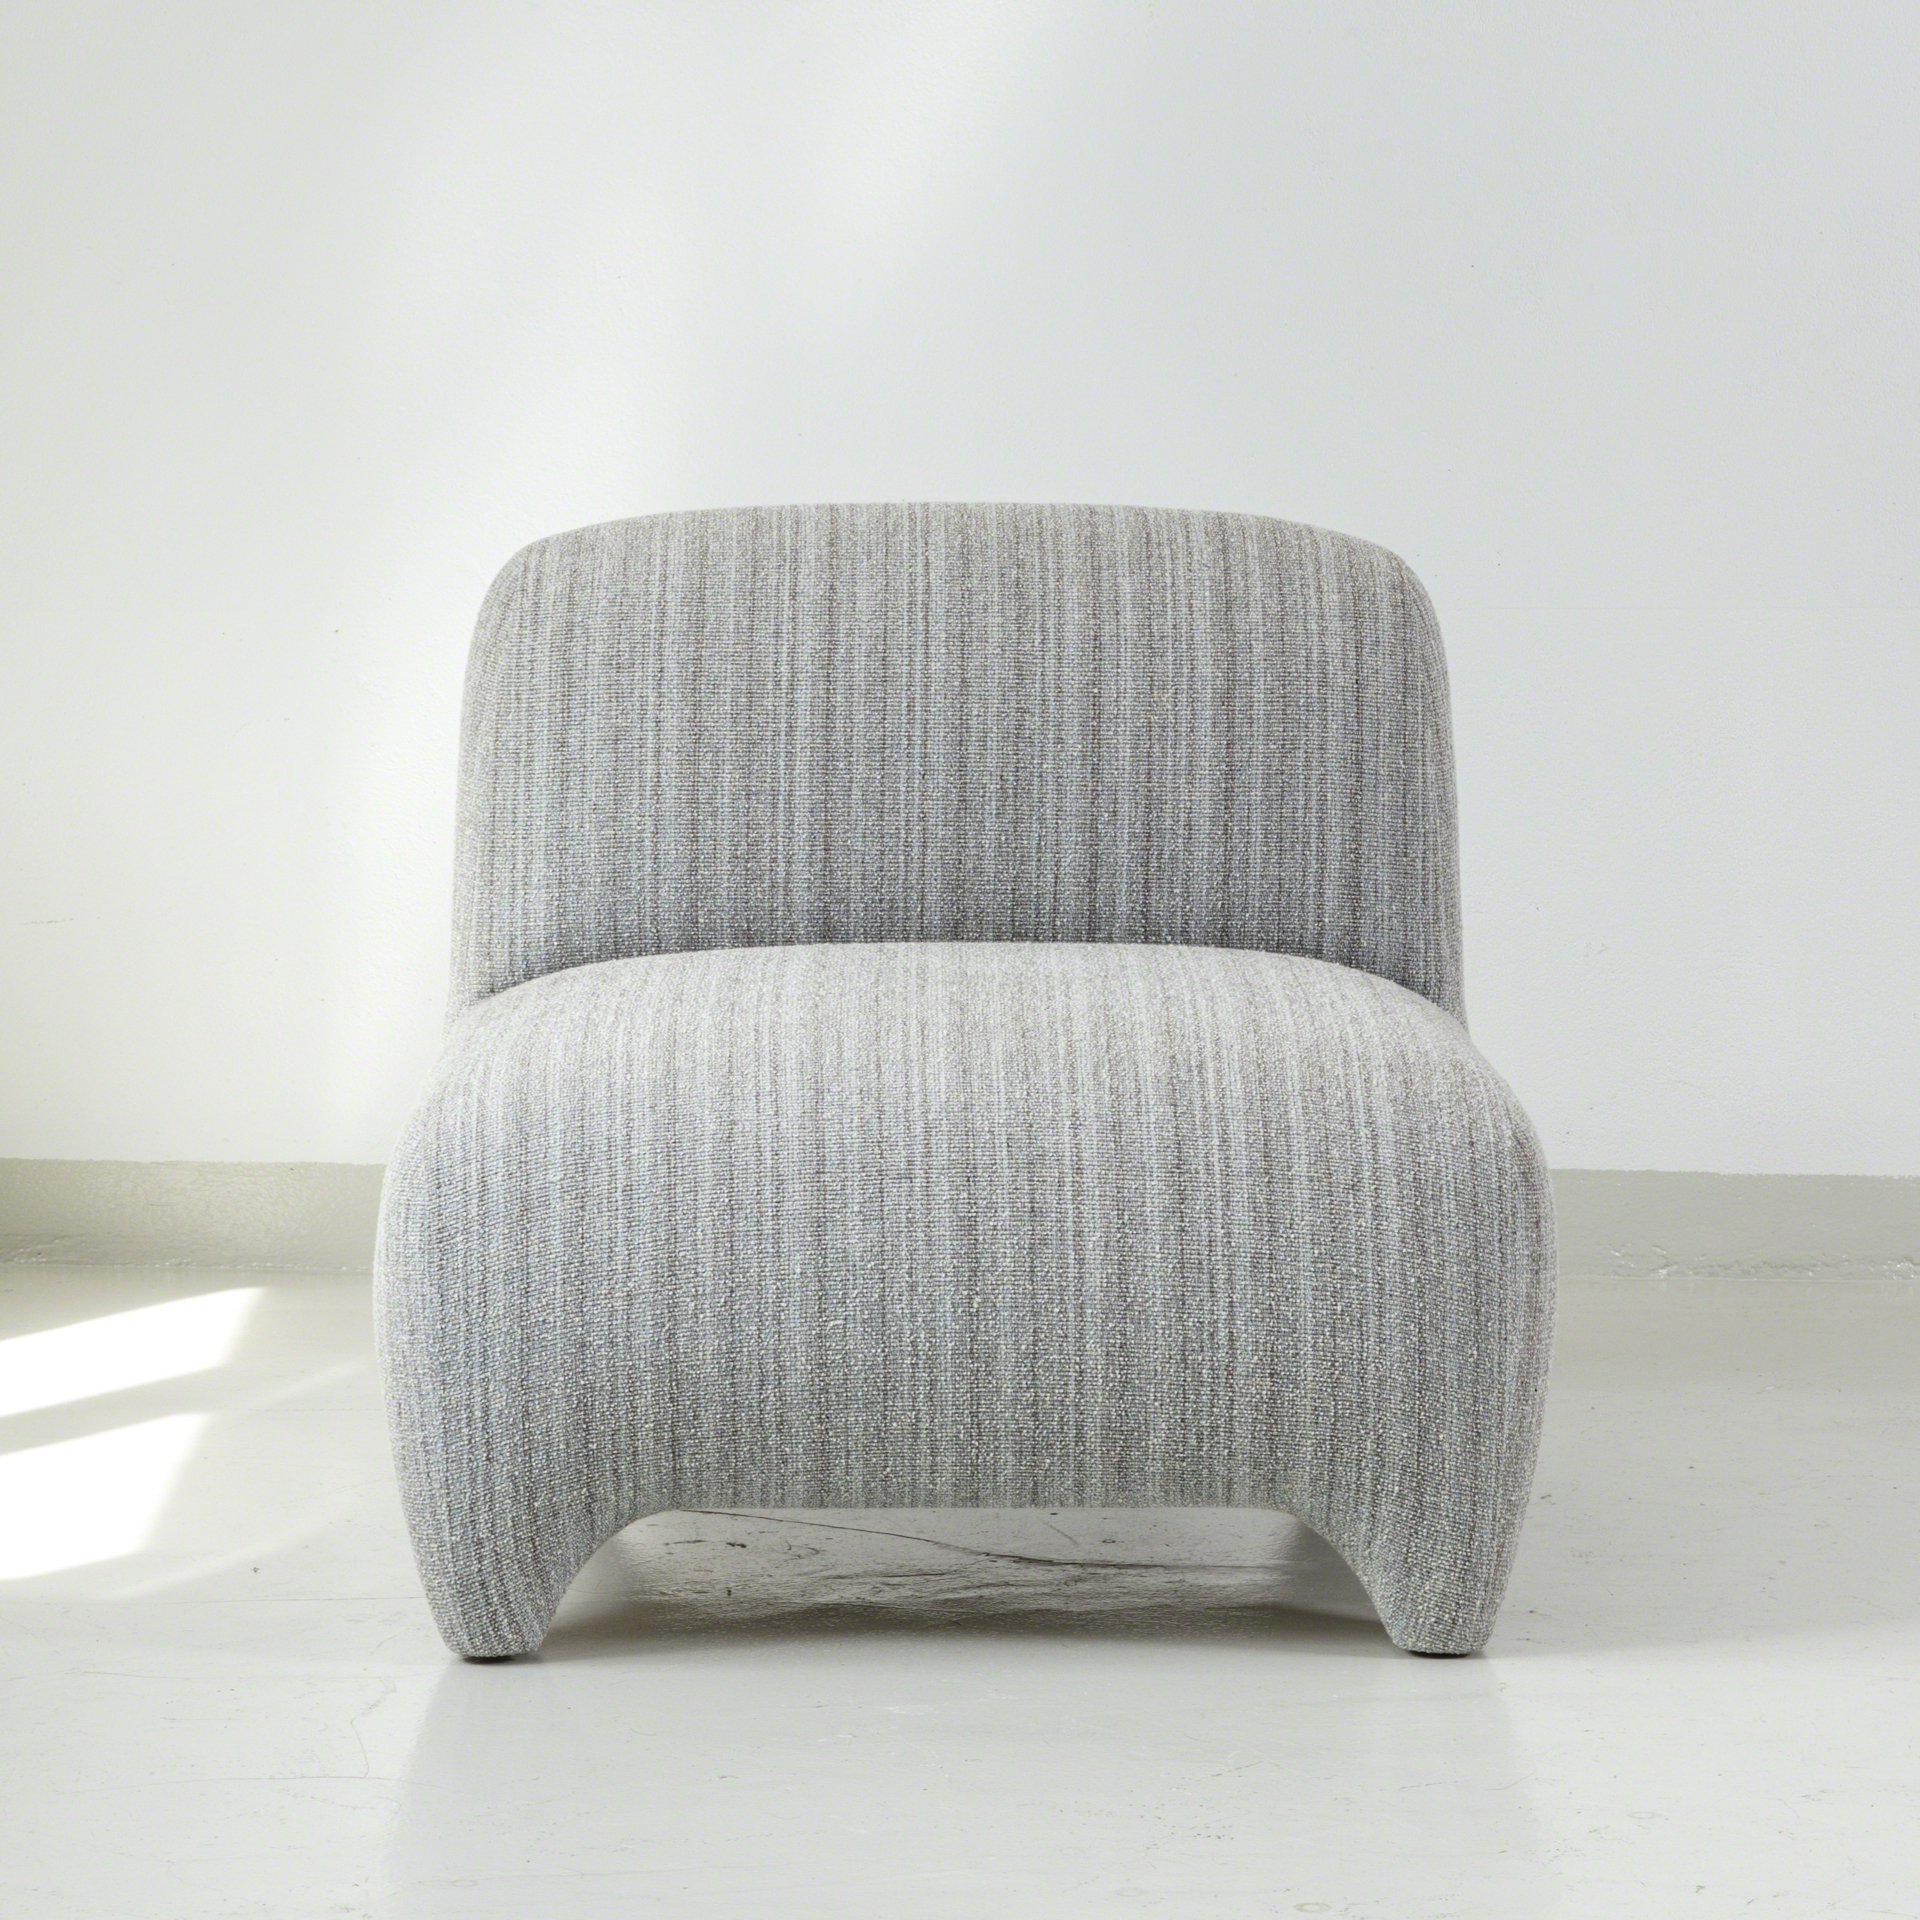 Slipper chair and ottoman by Tinatin Kilaberidze